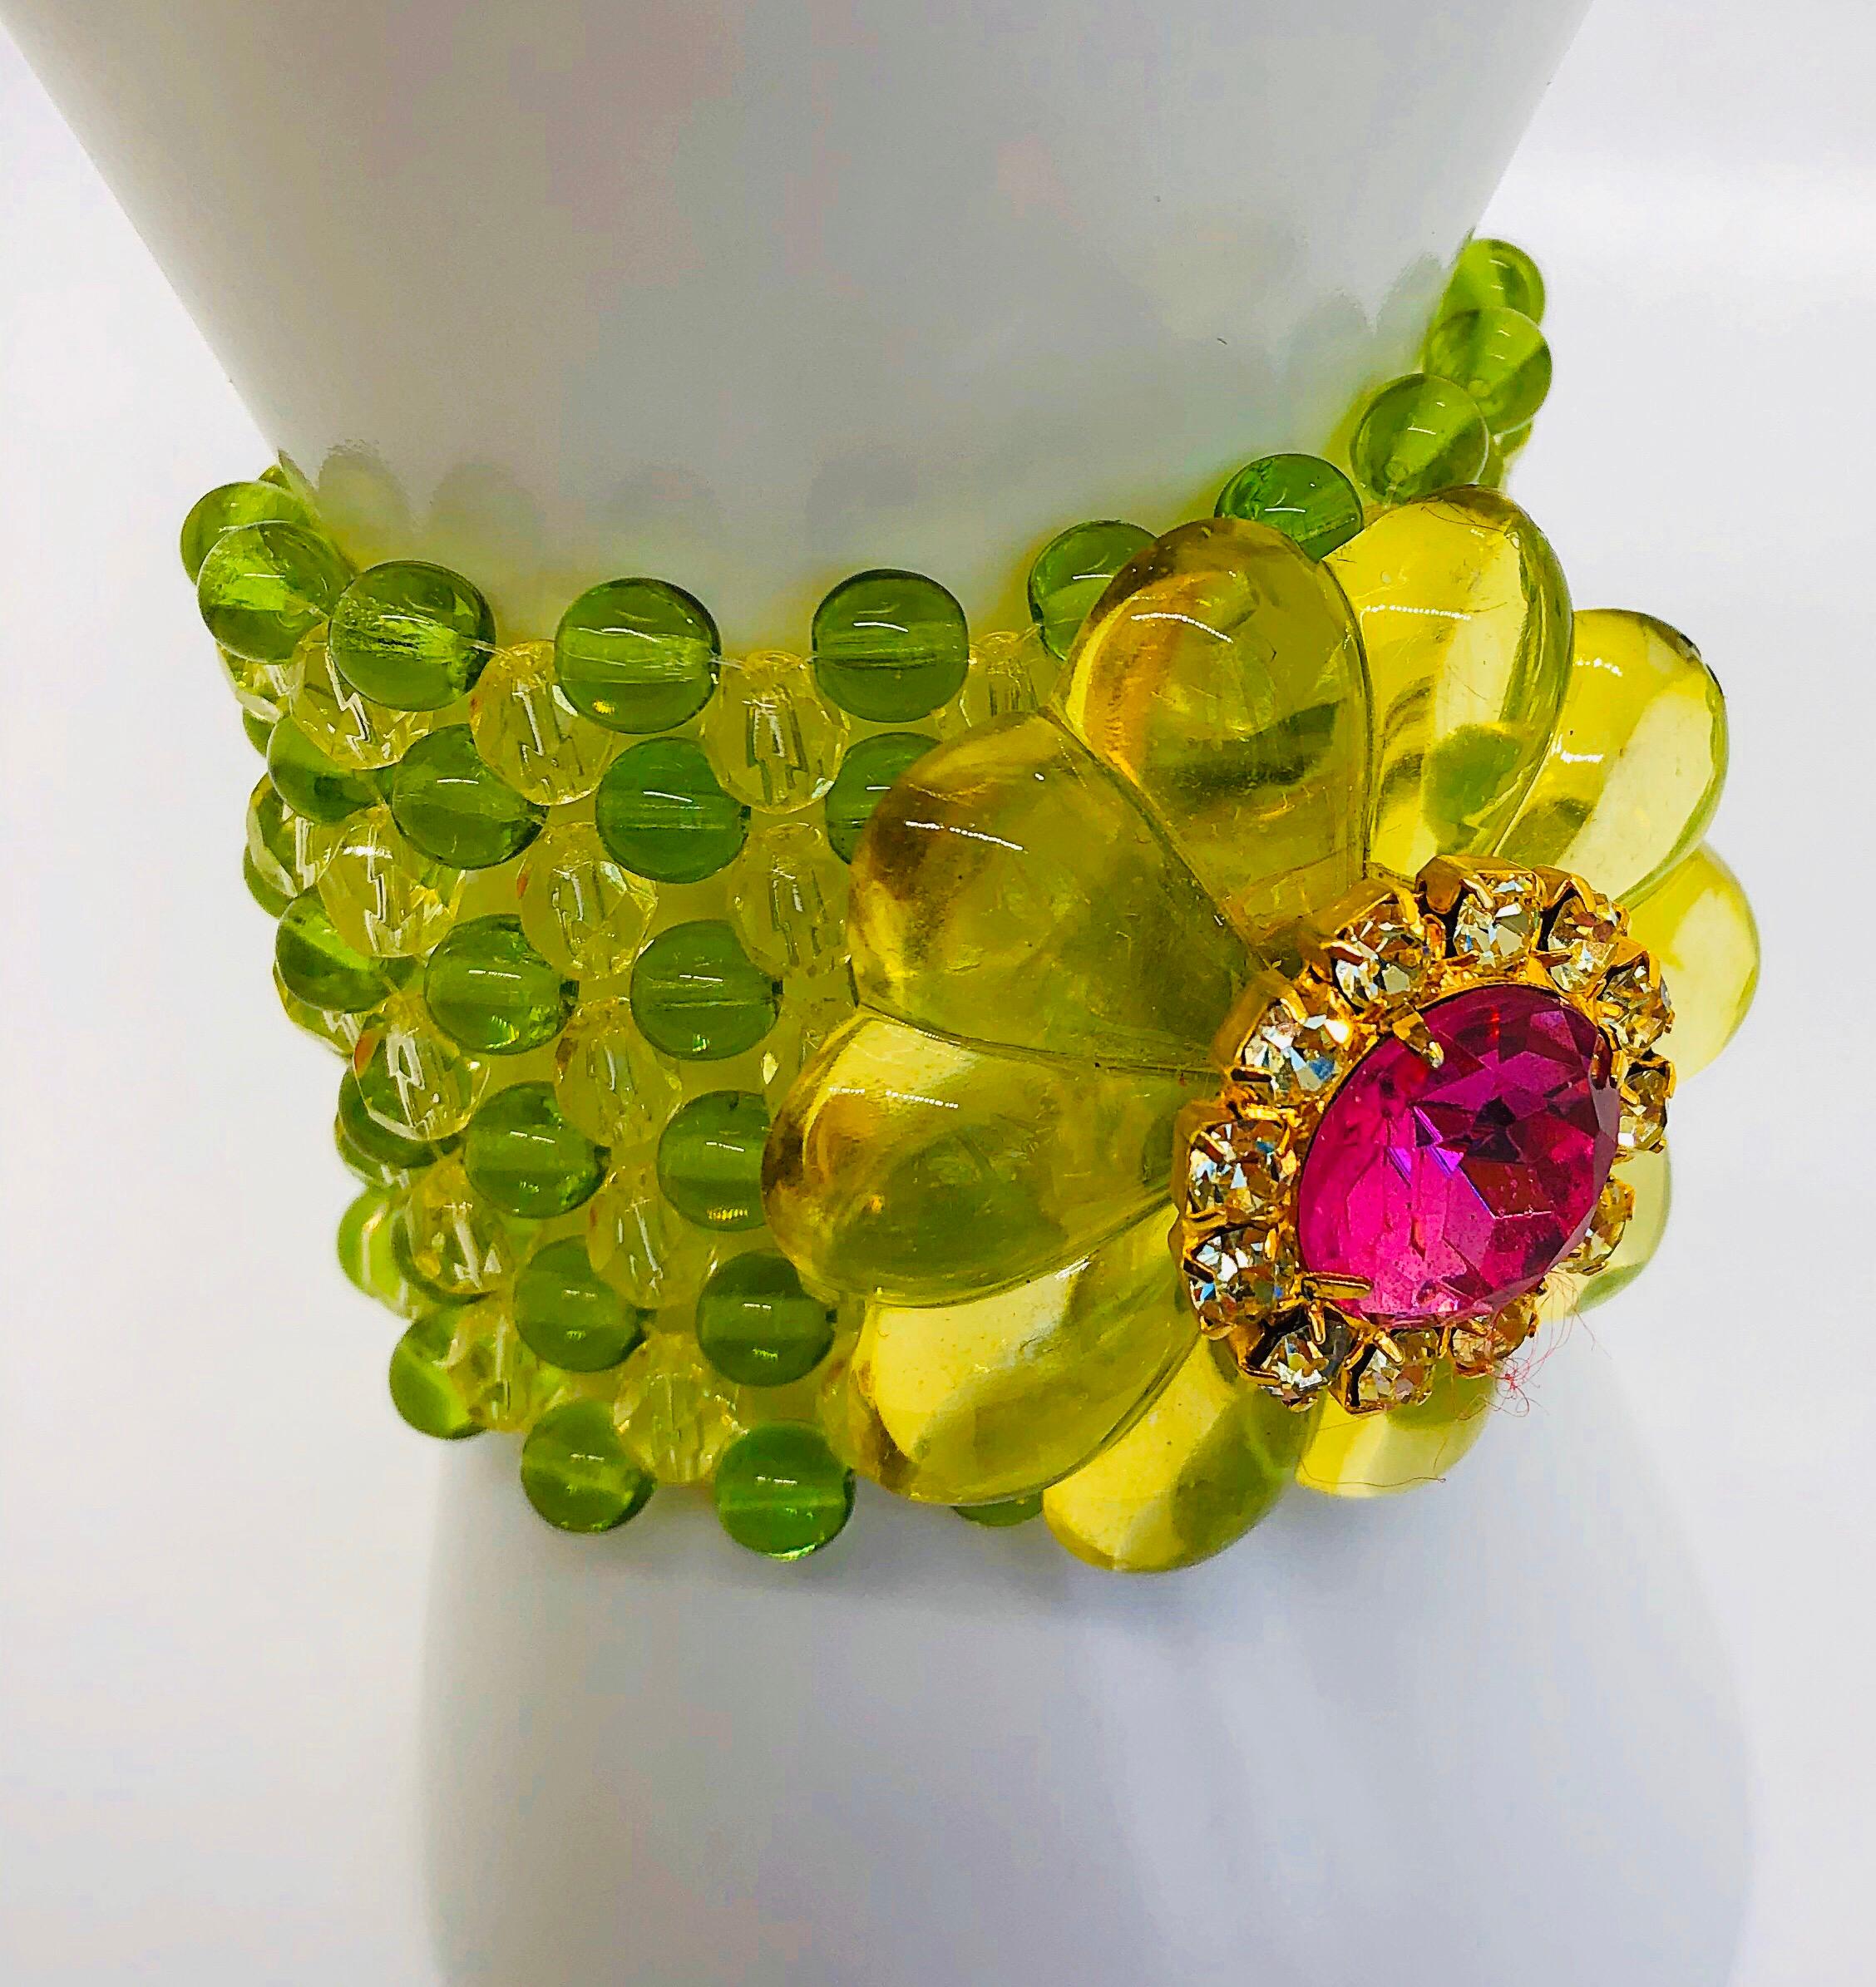 Chic 1960s Neon Lime Green + Hot Pink Lucite Vintage 60s Flower Bracelet Cuff 10